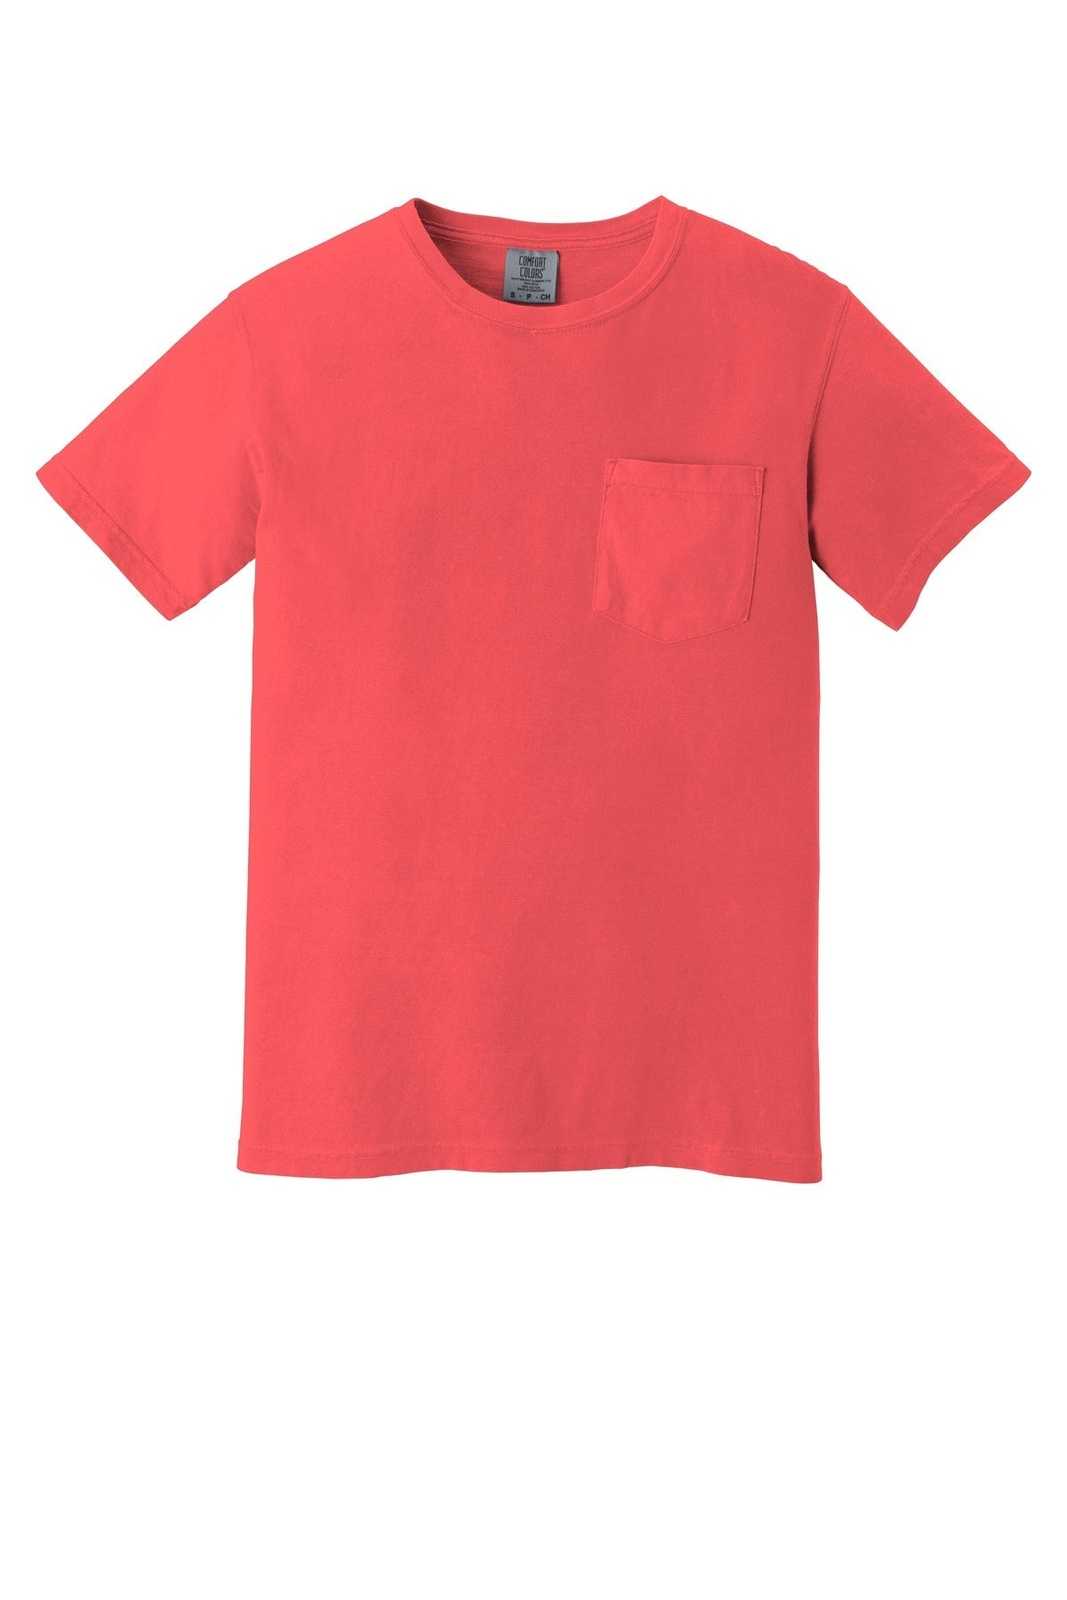 Comfort Colors 6030 Heavyweight Ring Spun Pocket Tee - Watermelon - HIT a Double